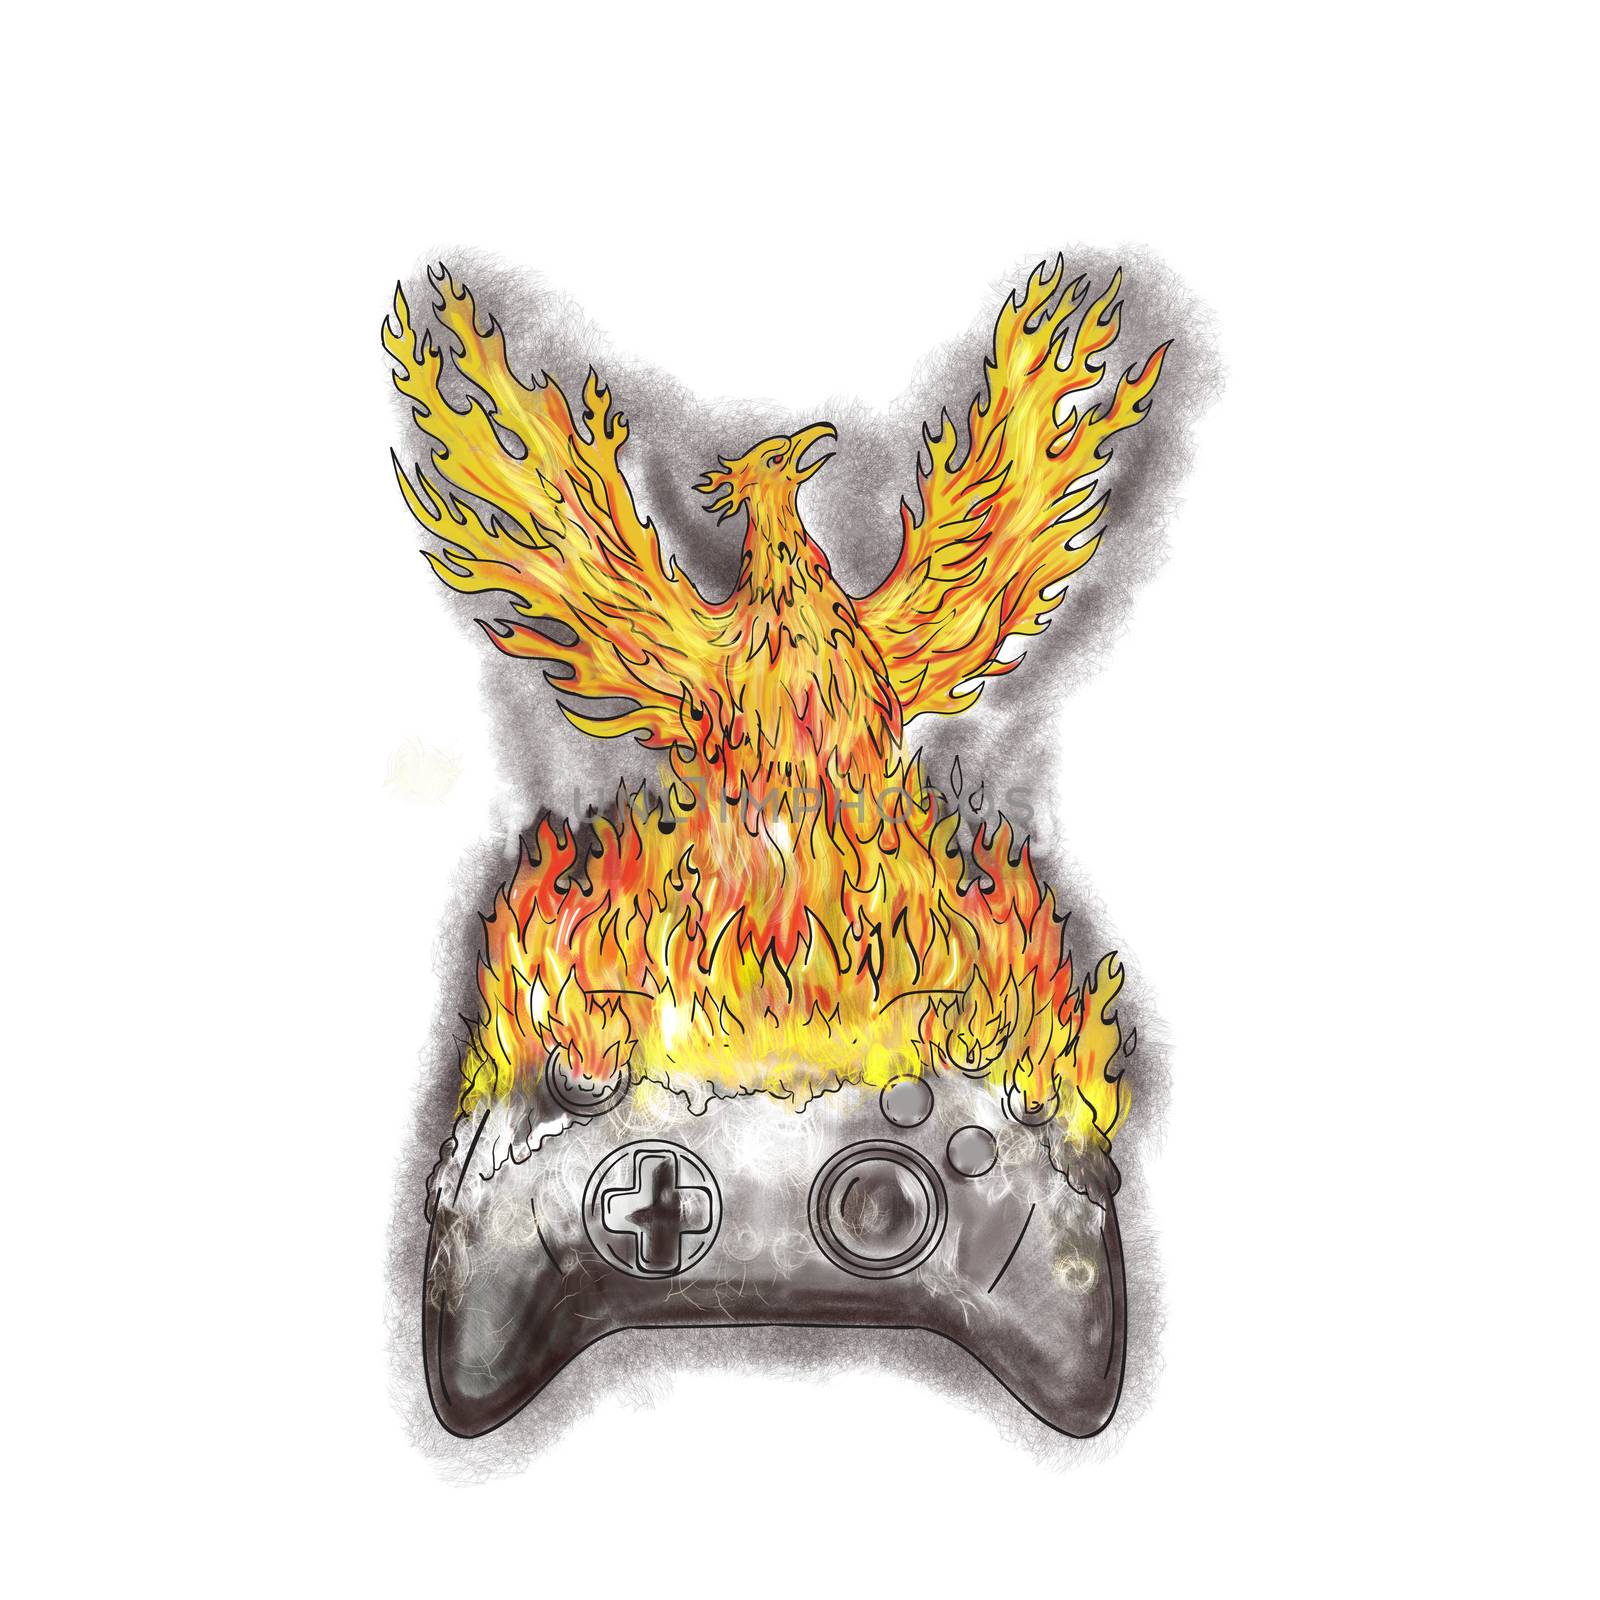 Tattoo style illustration of a phoenix with wings raised for flight rising over burning game controller set on isolated white background. 